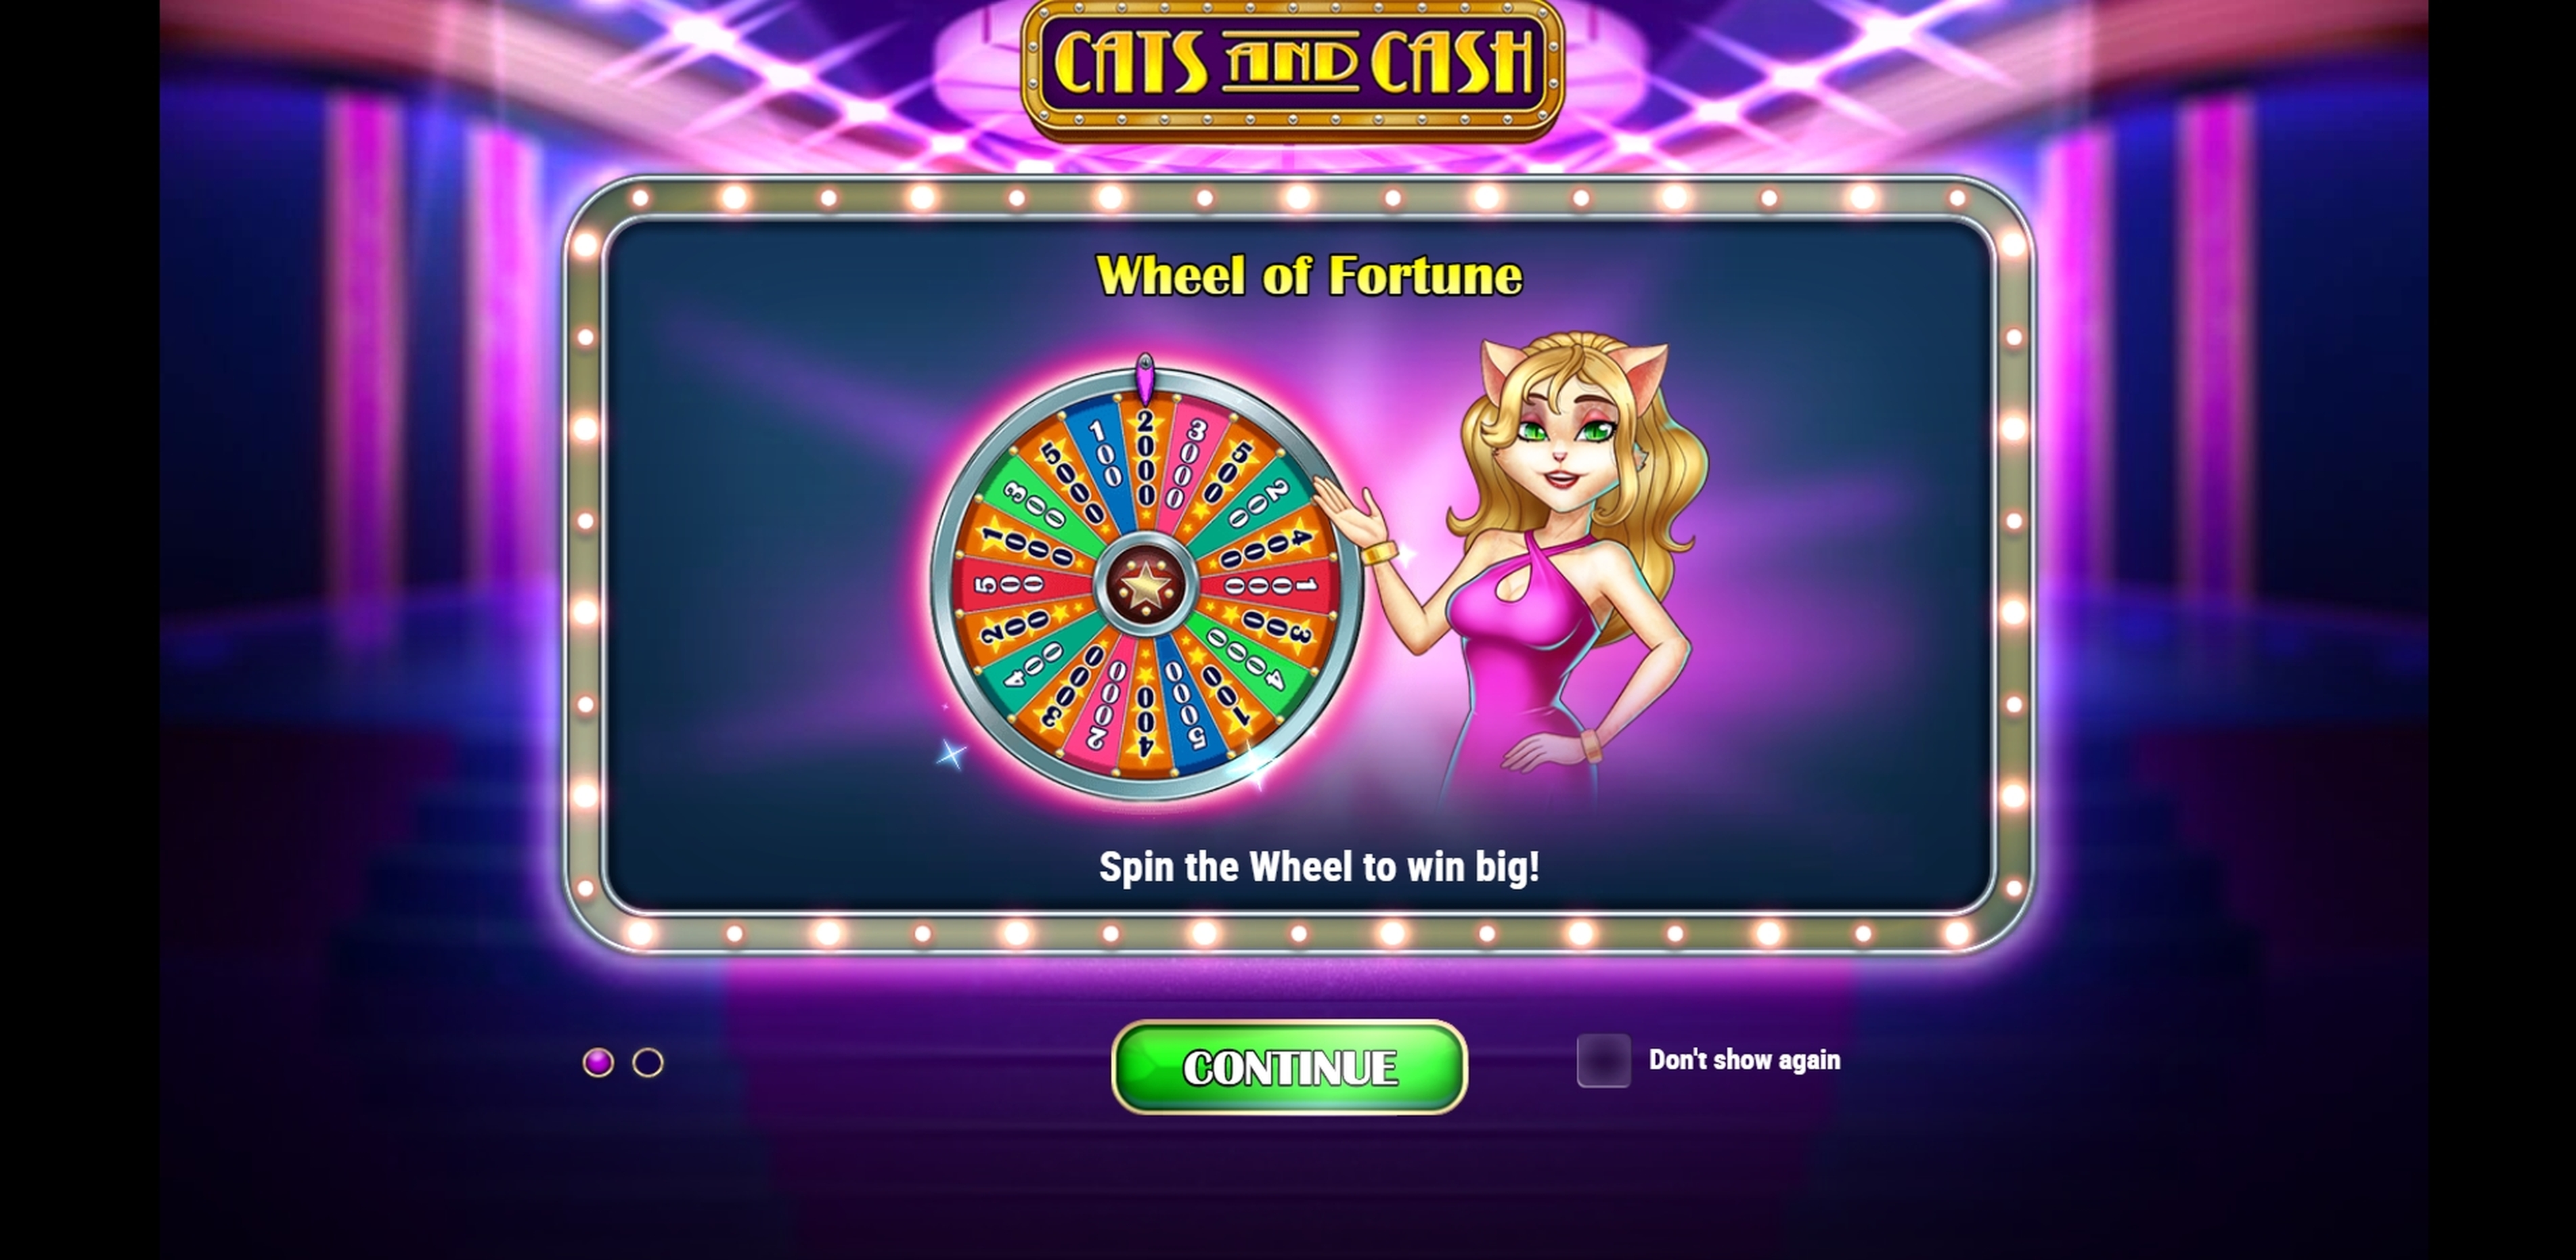 Play Cats and Cash Free Casino Slot Game by Playn GO